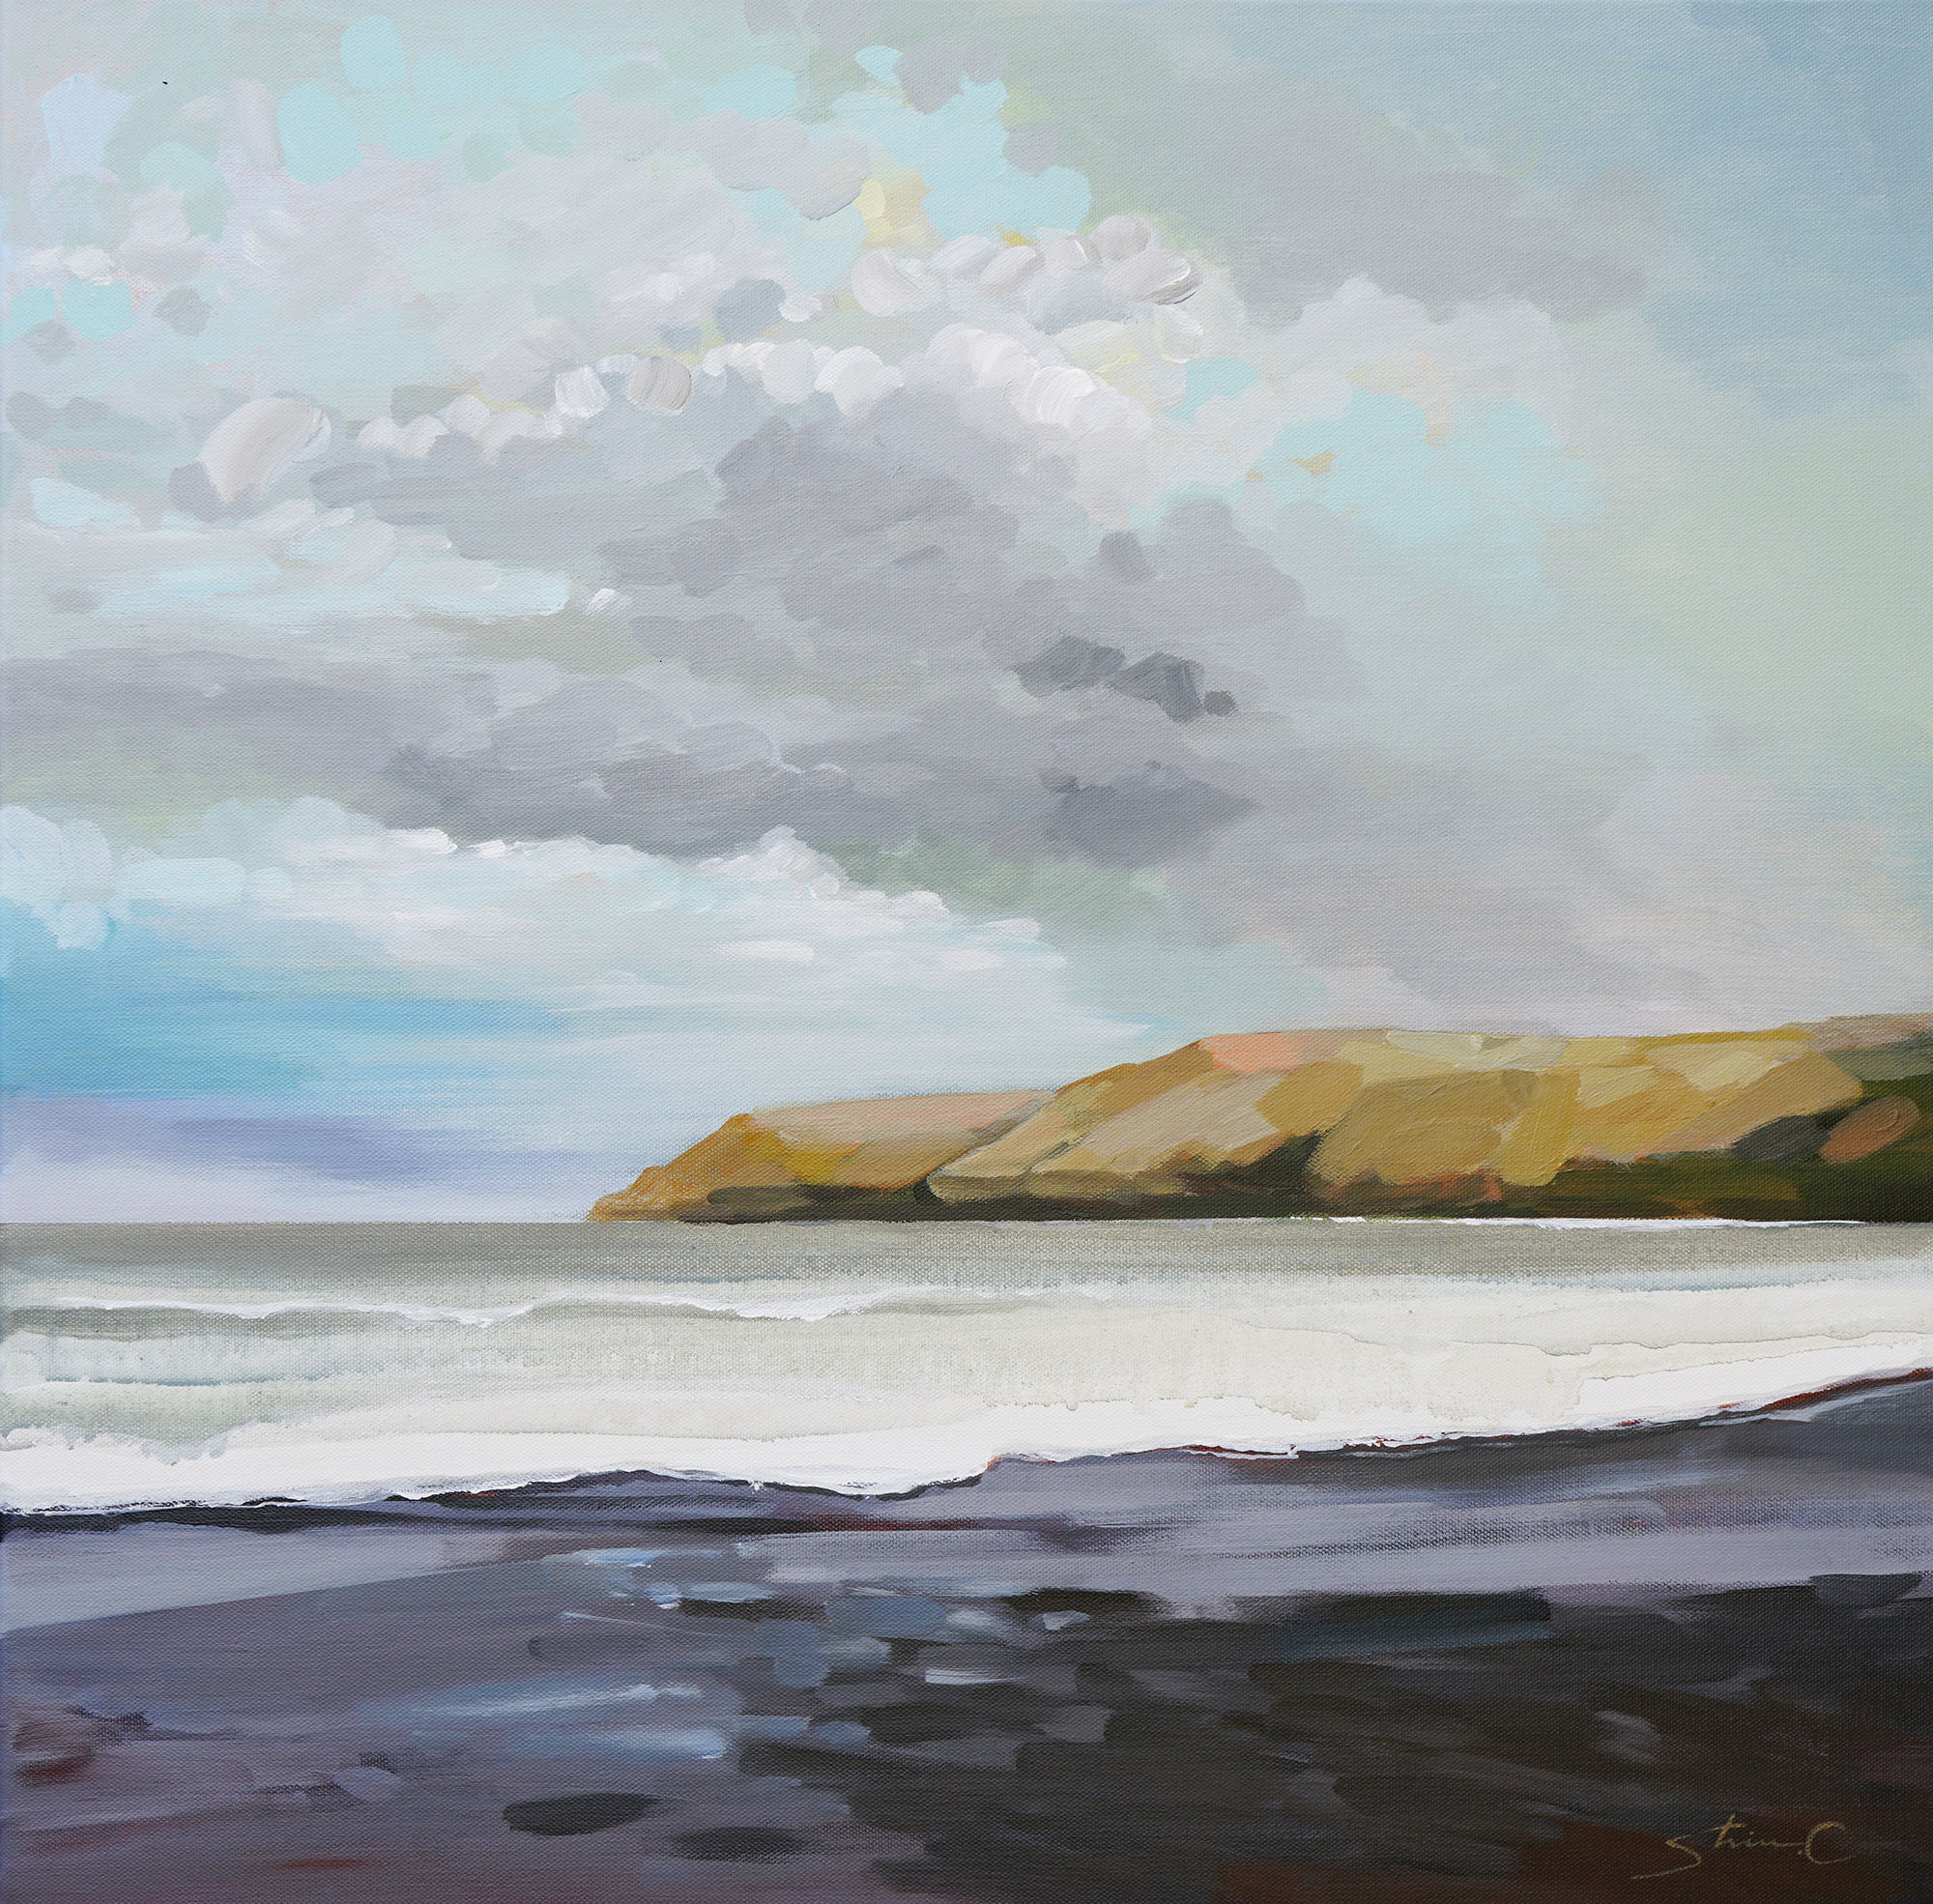 Black Sand Beach Under A Cloudy Sky By Shina Choi 21 Painting The Artling